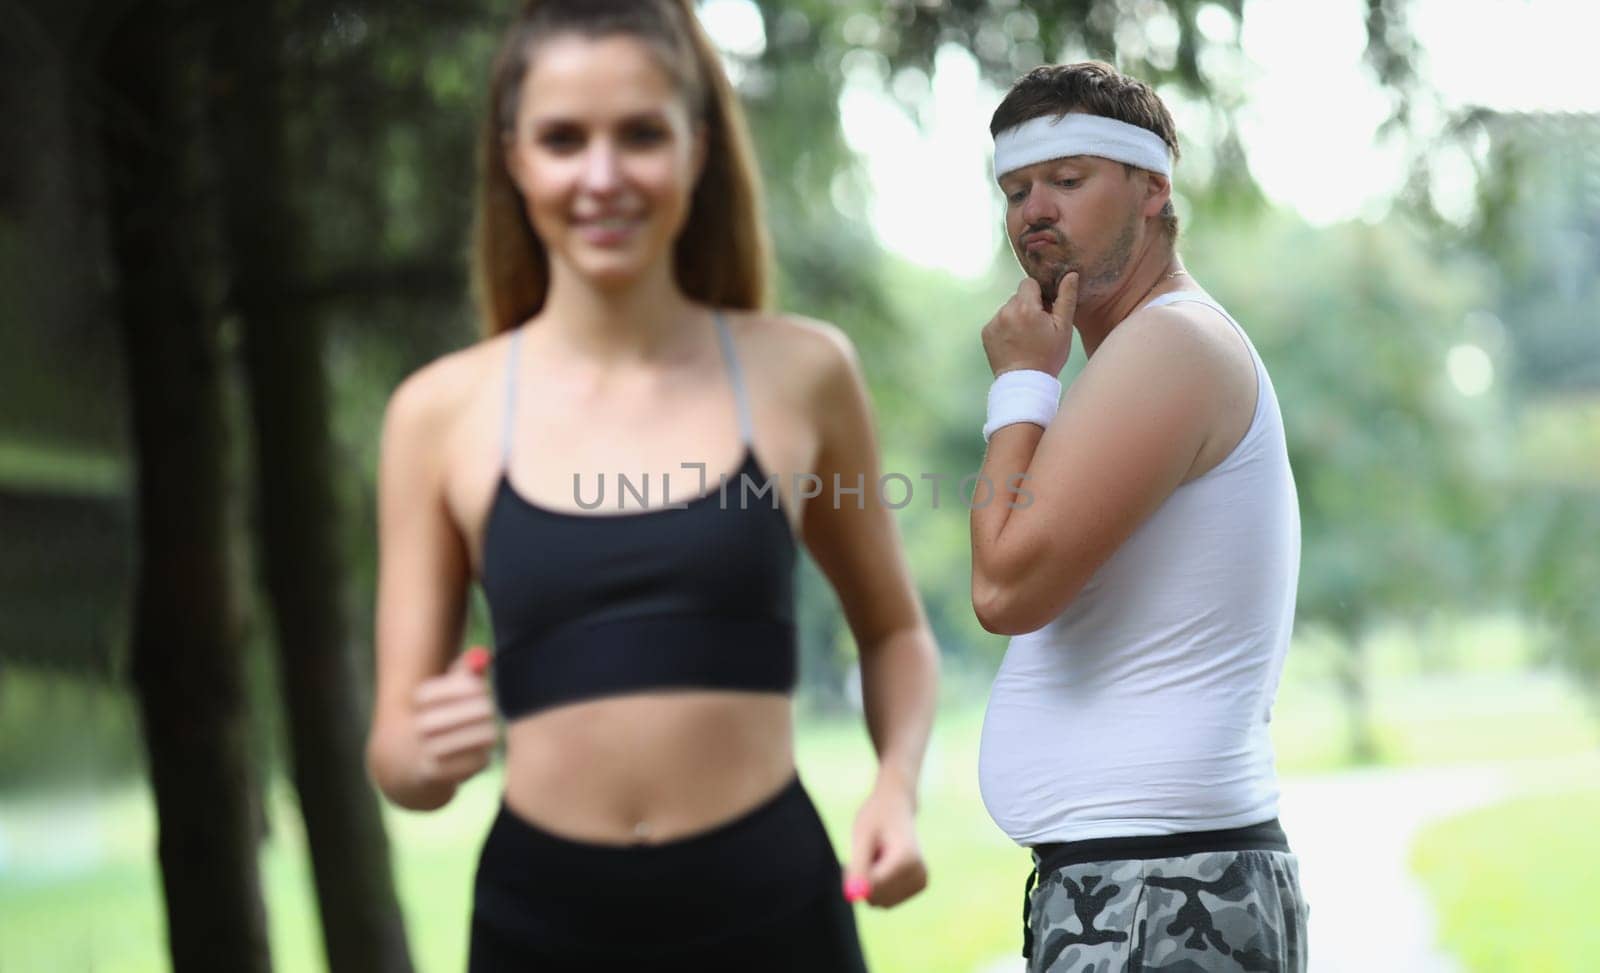 Man emotionally looks at beautiful athletic girl in park. Man jealous of woman athletic body in park